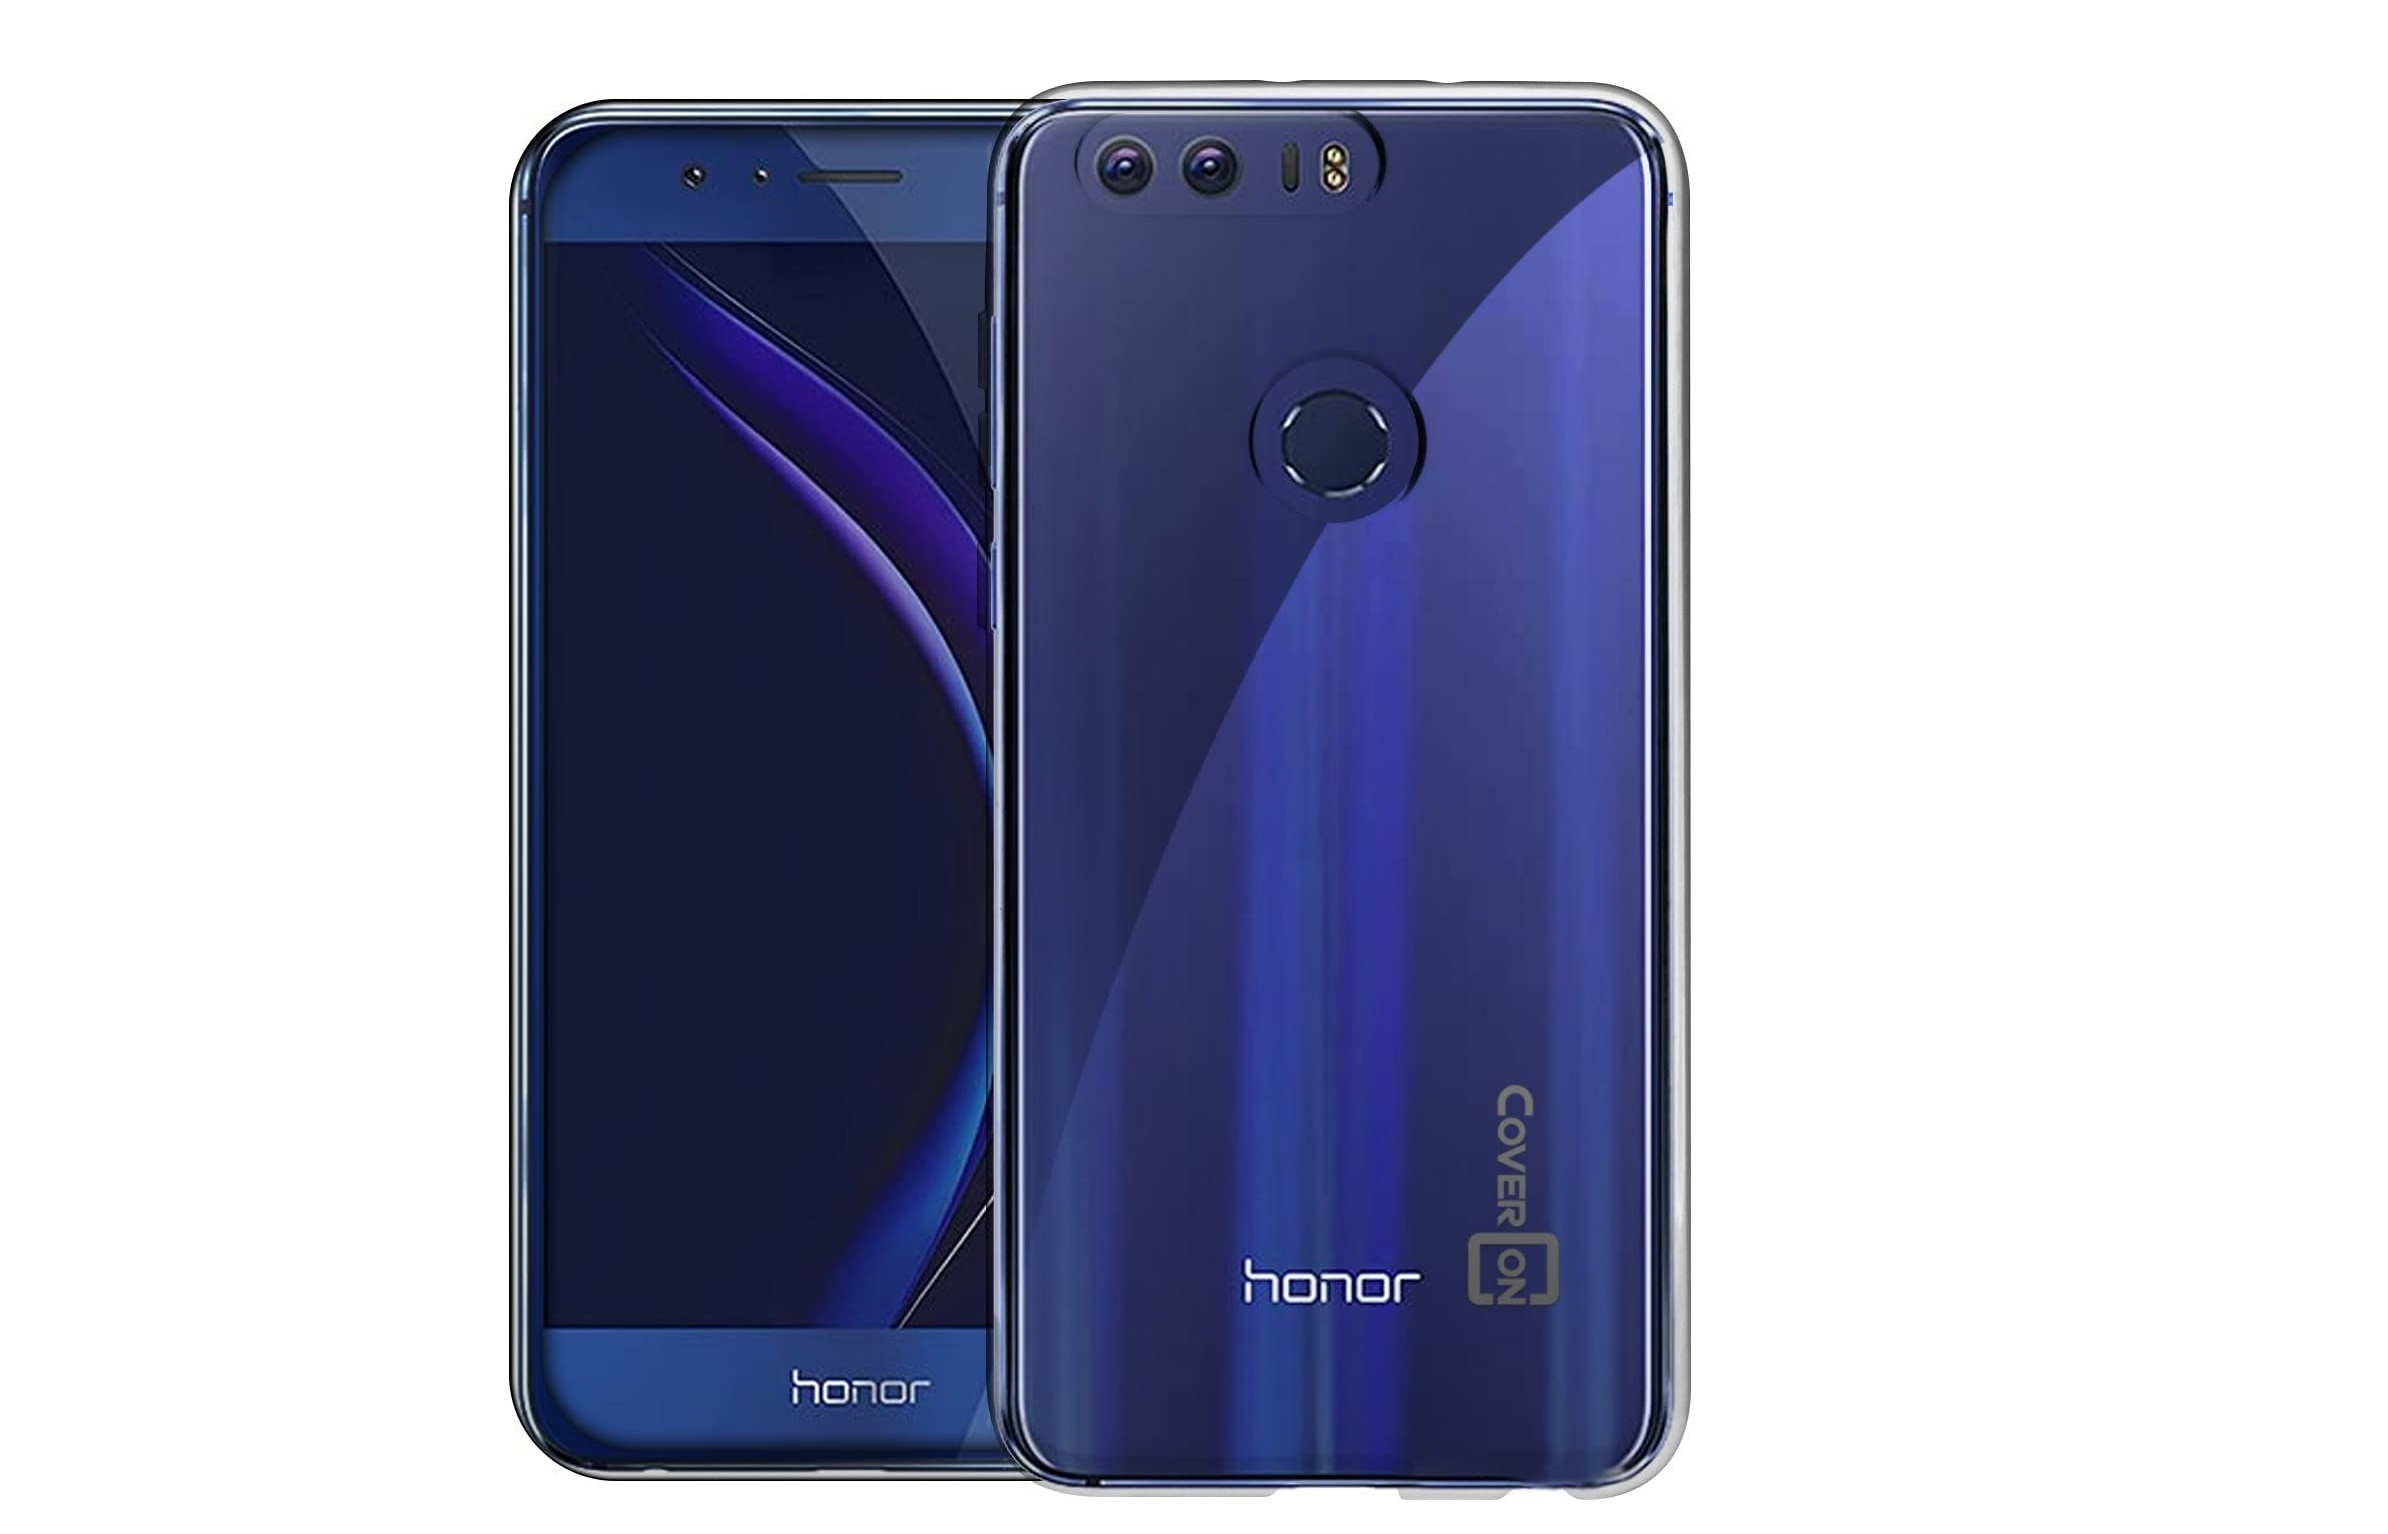 How to boot into safe mode on Honor 8